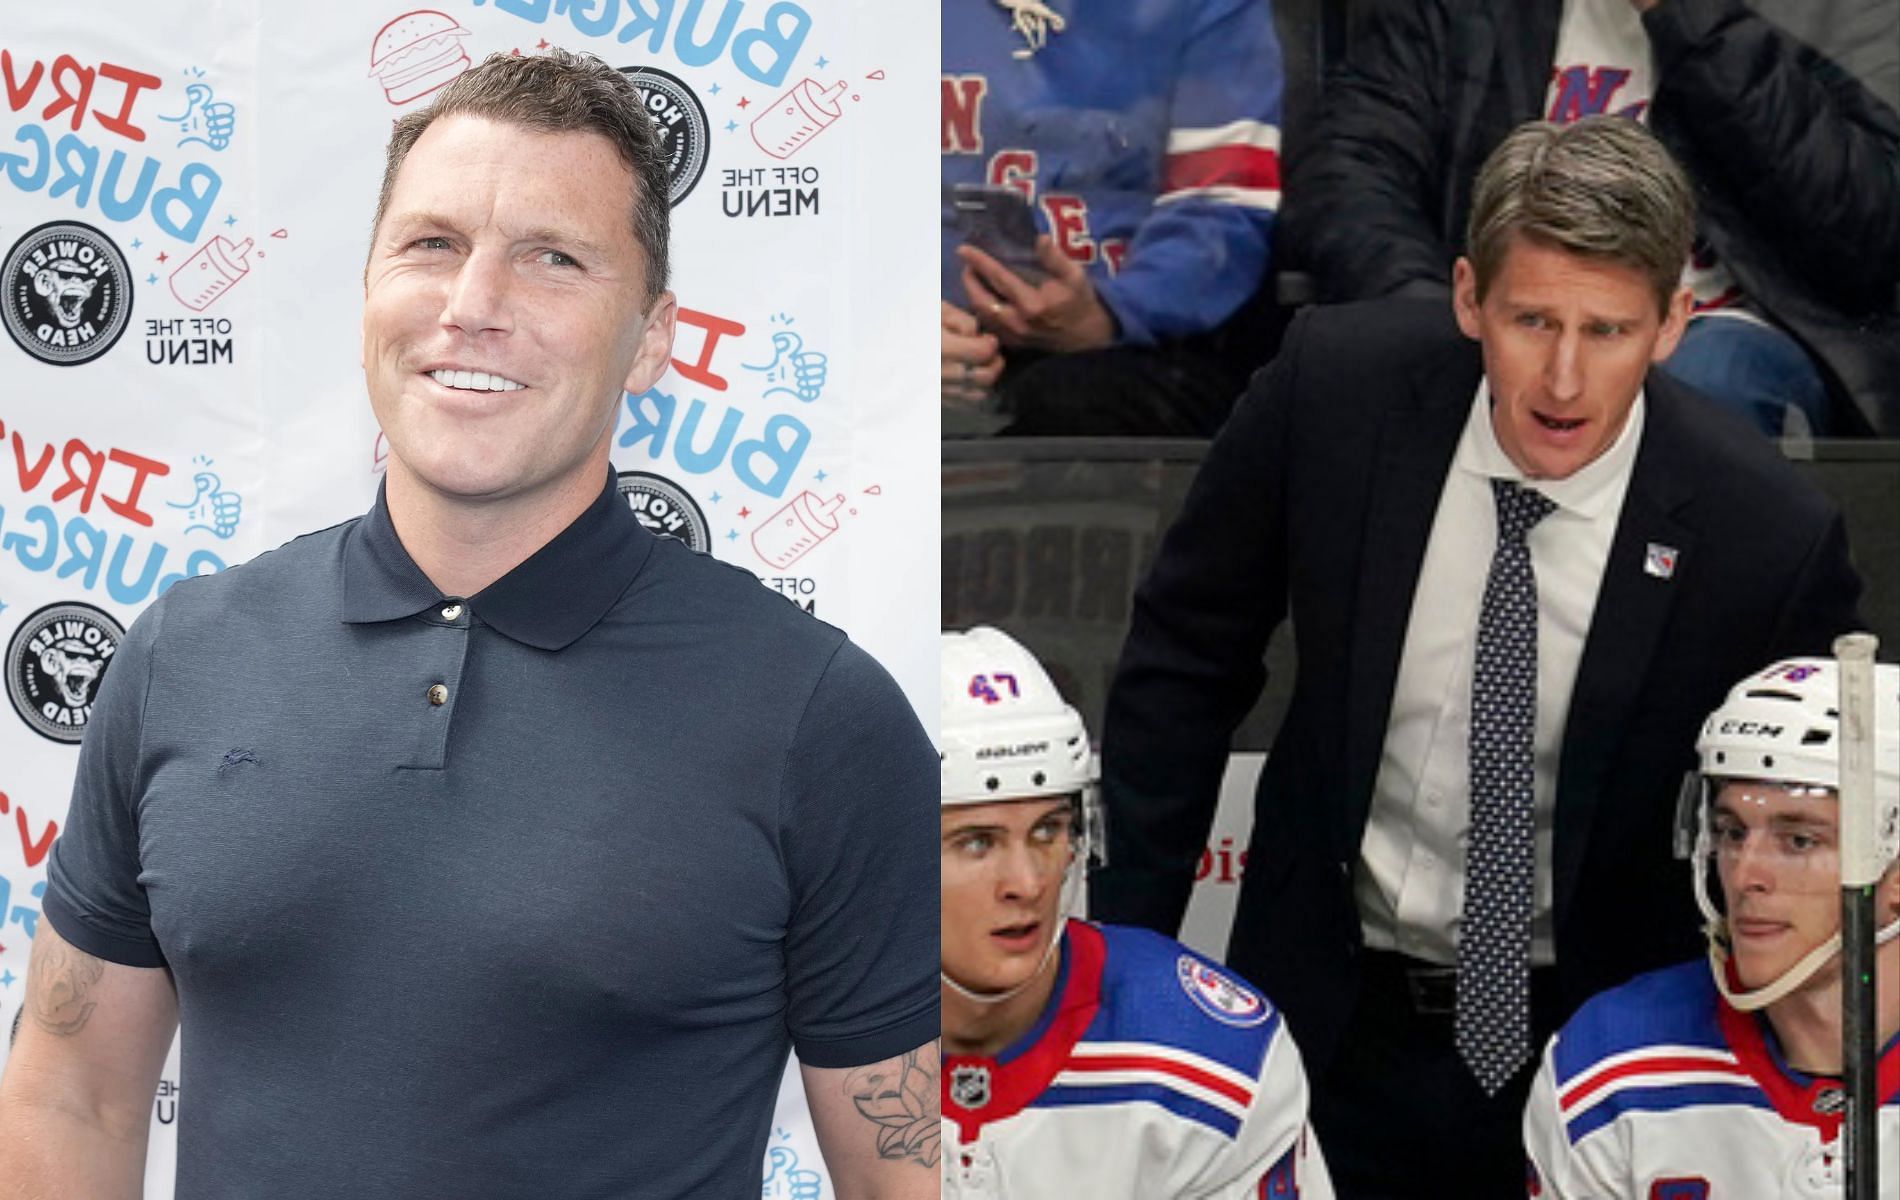 Sean Avery eyebrow Edmonton Oilers head coach replacement replacement Kris Knoblauch